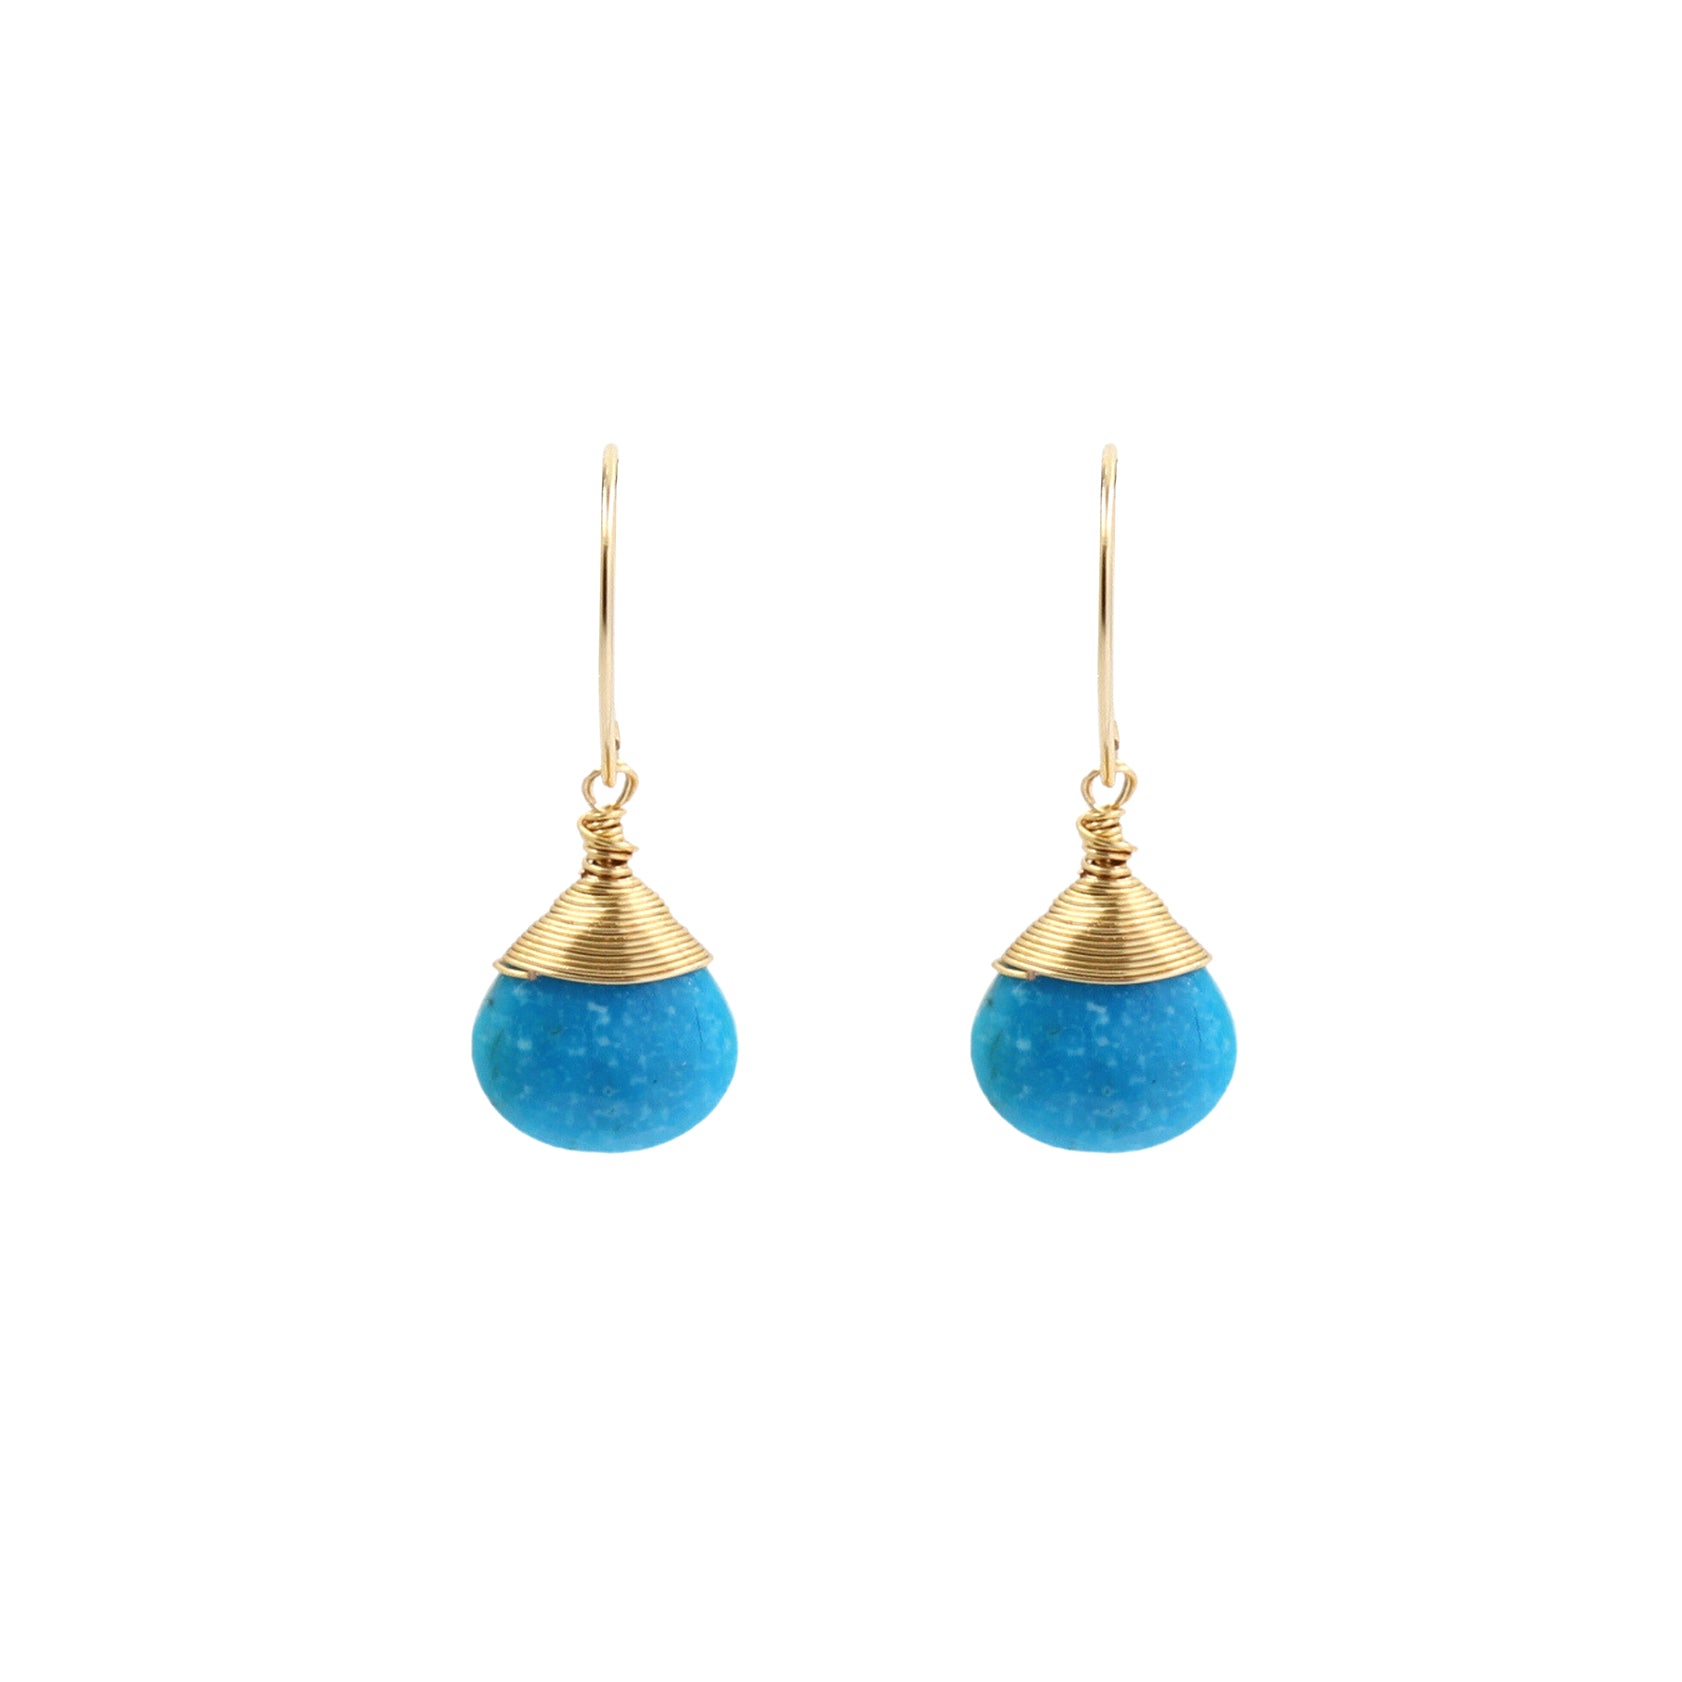 Adorn Yourself with 'Donna' Gemstone Drop Earrings, Exclusively from Gosia Orlowska